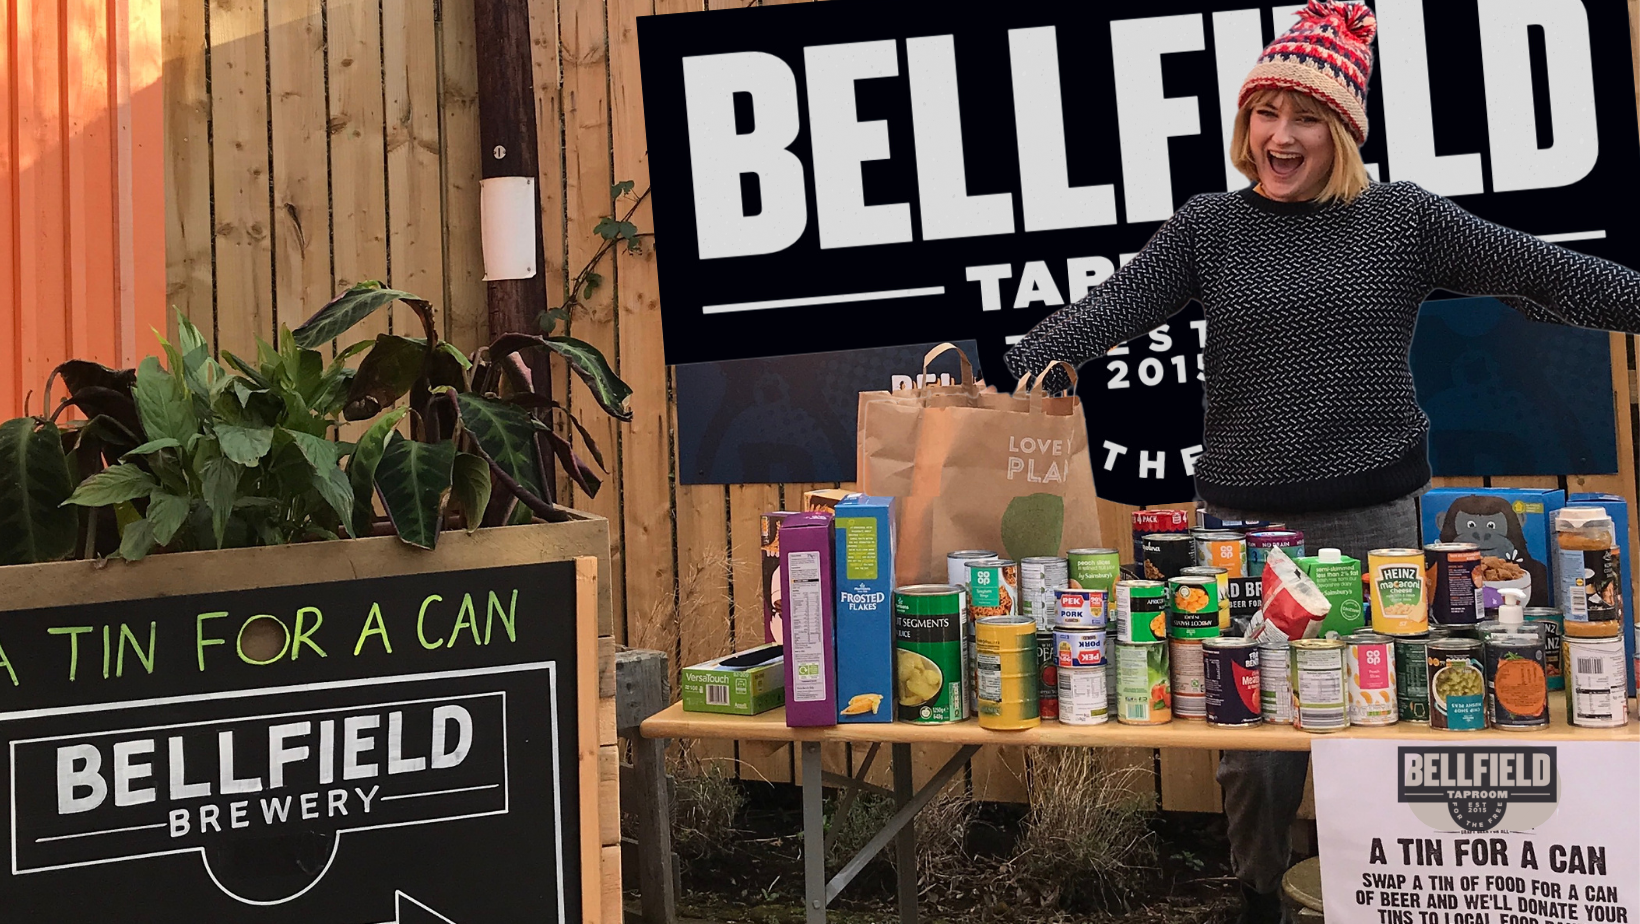 Support Local Food Banks - Tin for a Can Campaign